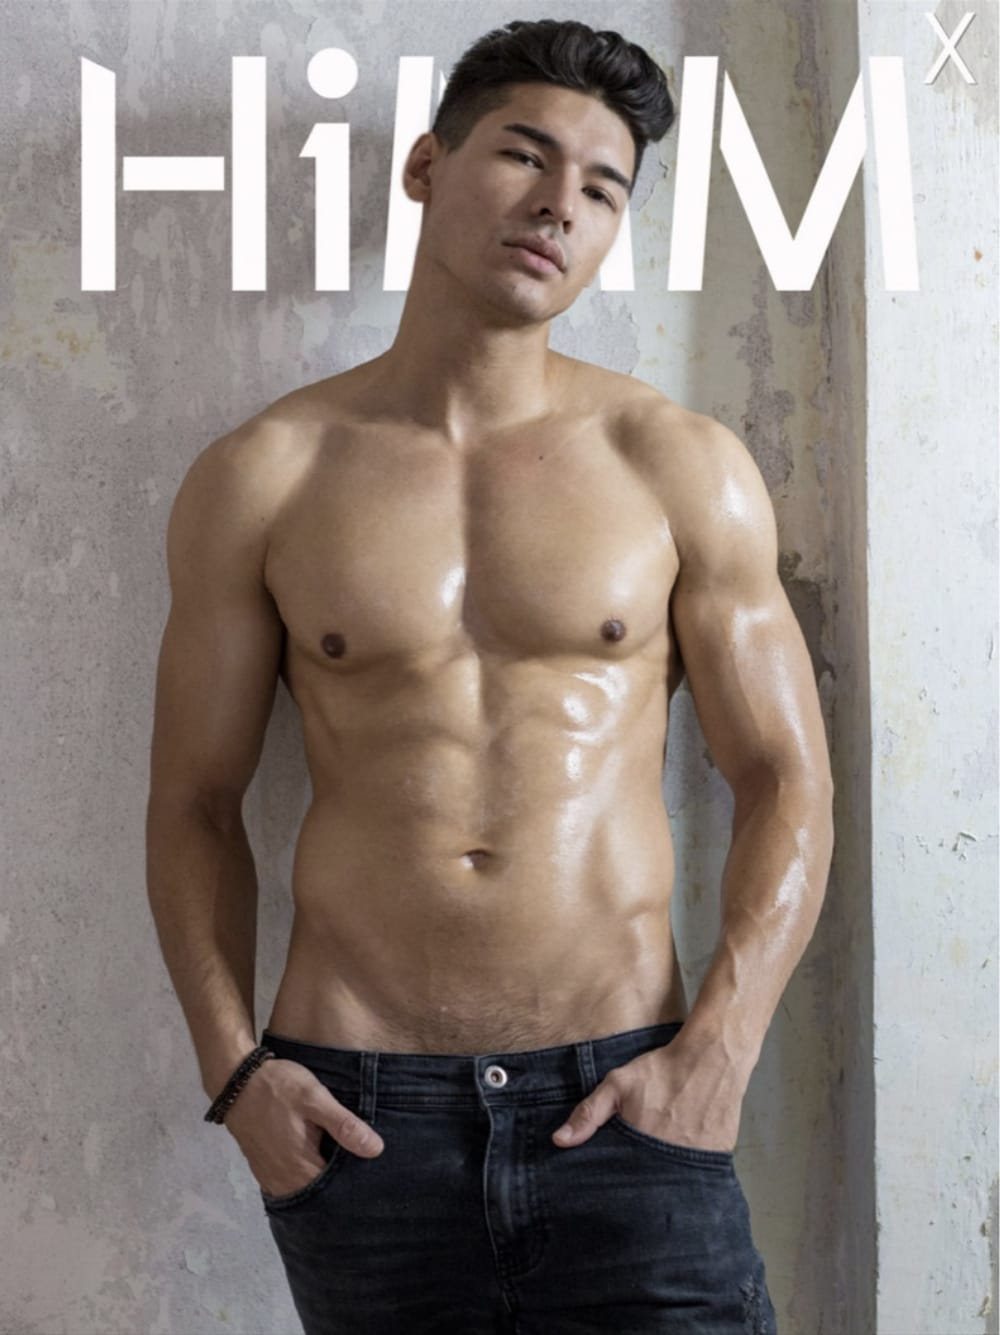 HiMM X Taiwan Extra Pages เพิ่มจำนวนหน้า ‖ 18+【PHOTO】